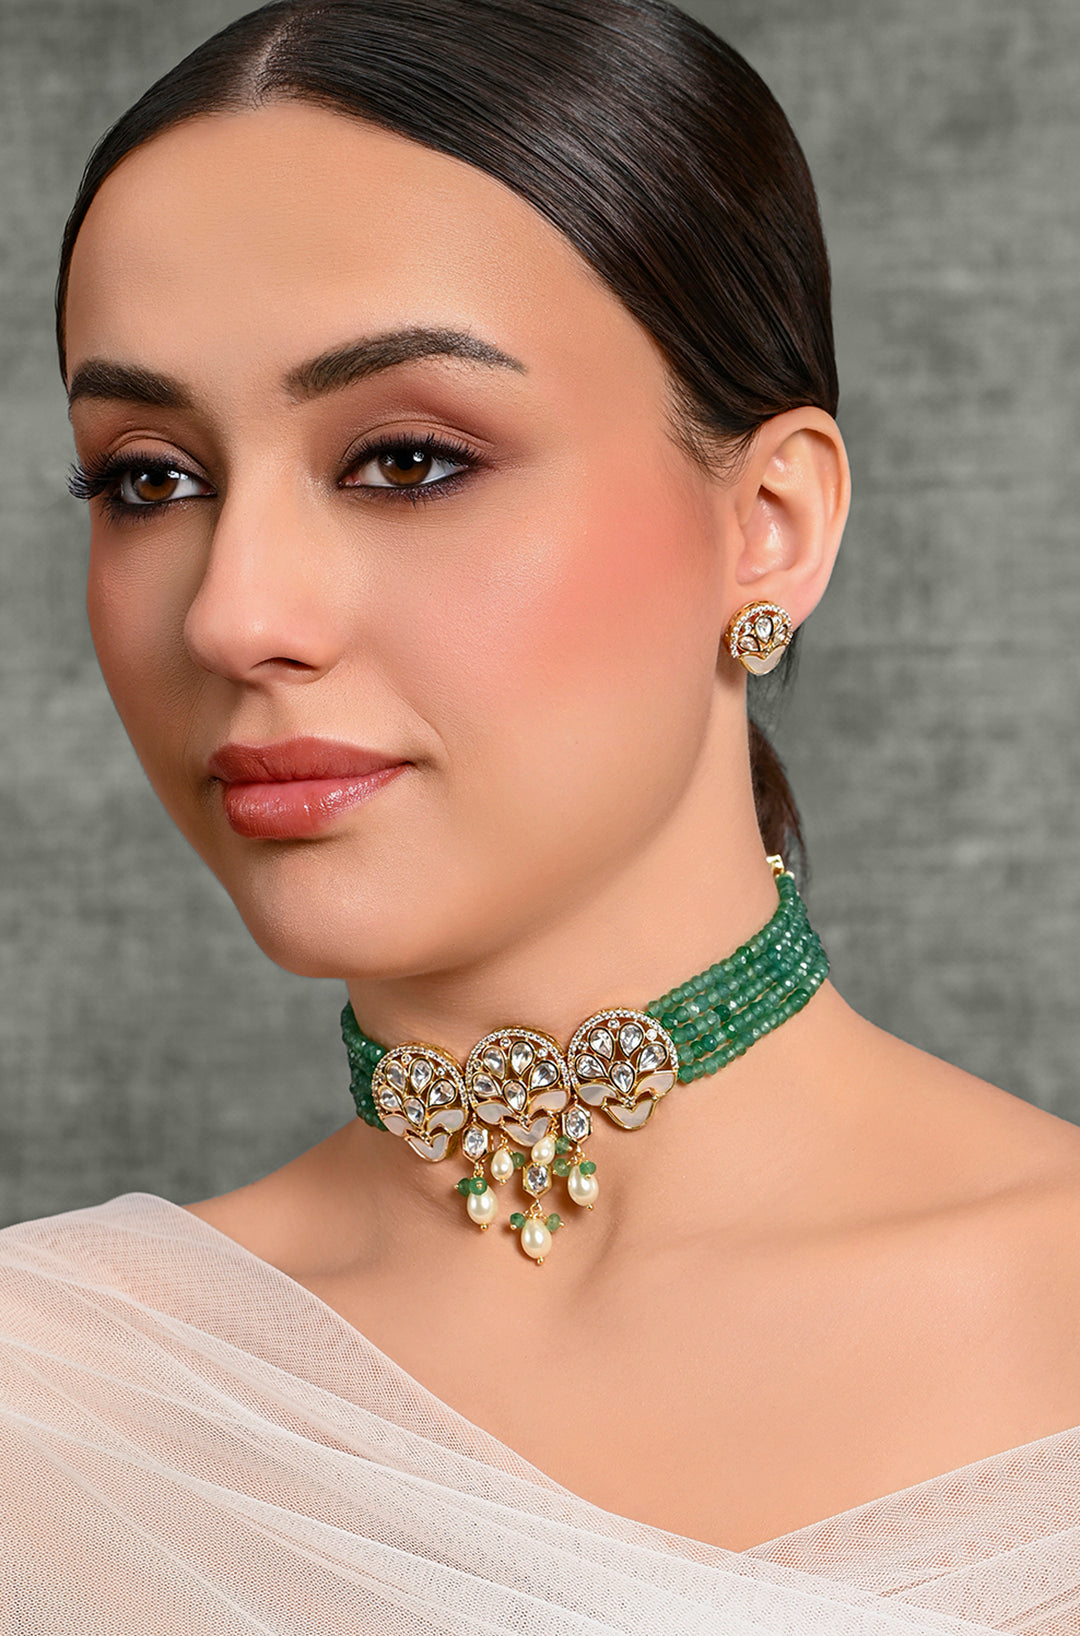 Enthralling Choker With Earrings